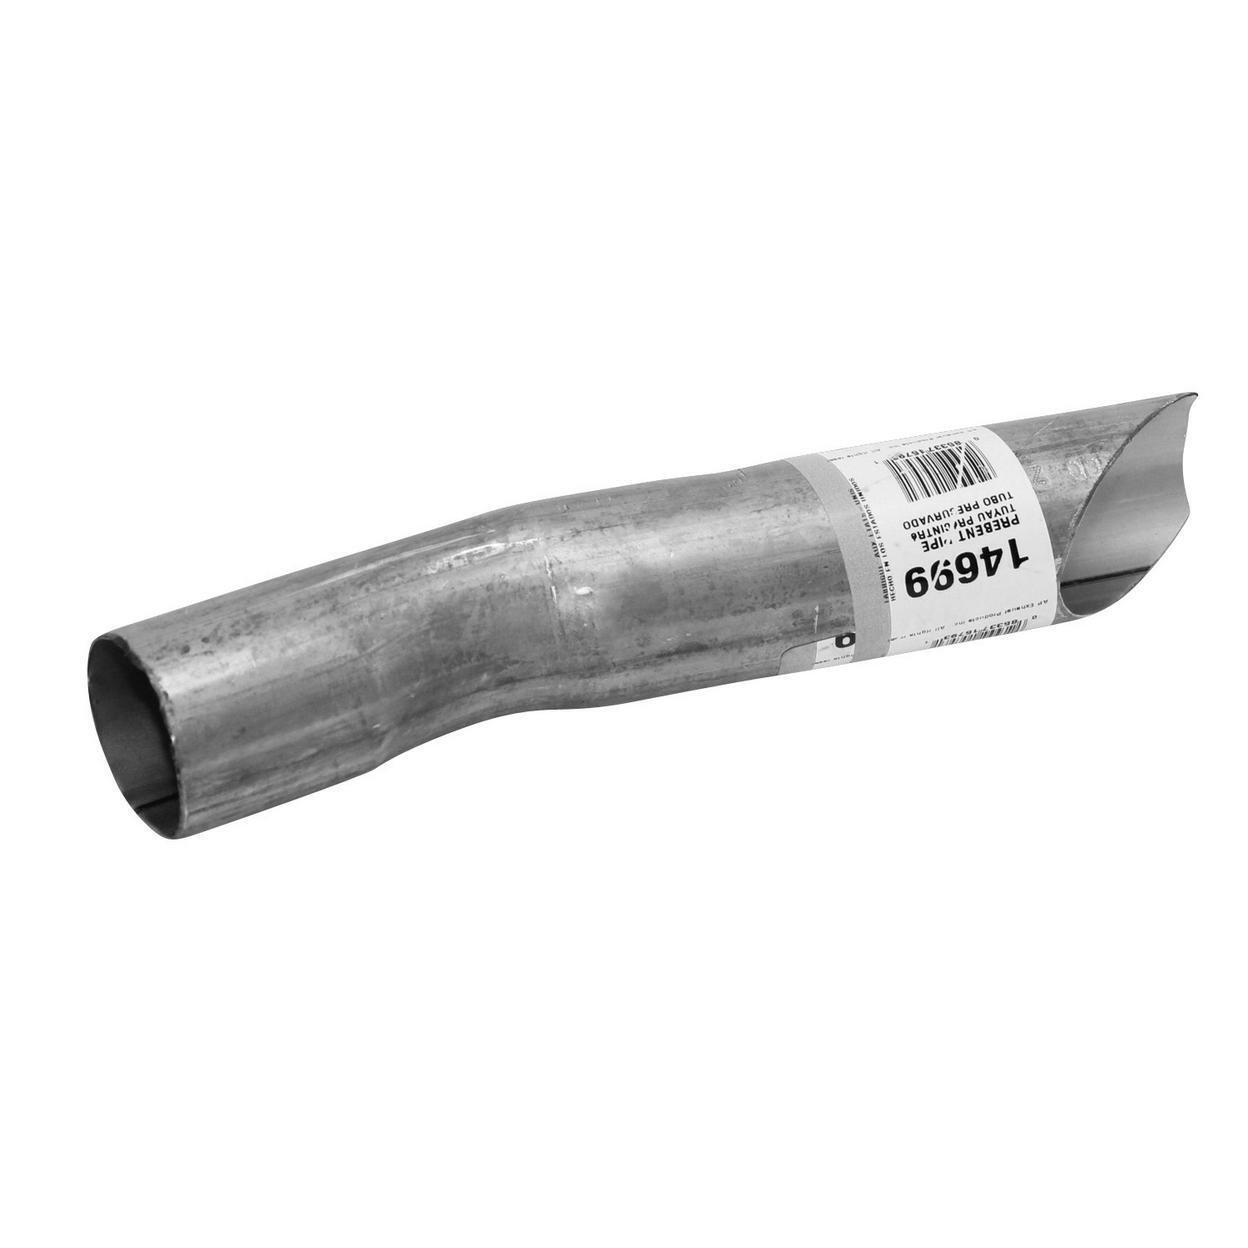 Exhaust Tail Pipe for 1993-1996 Chevrolet Corsica 3.1L V6 GAS OHV